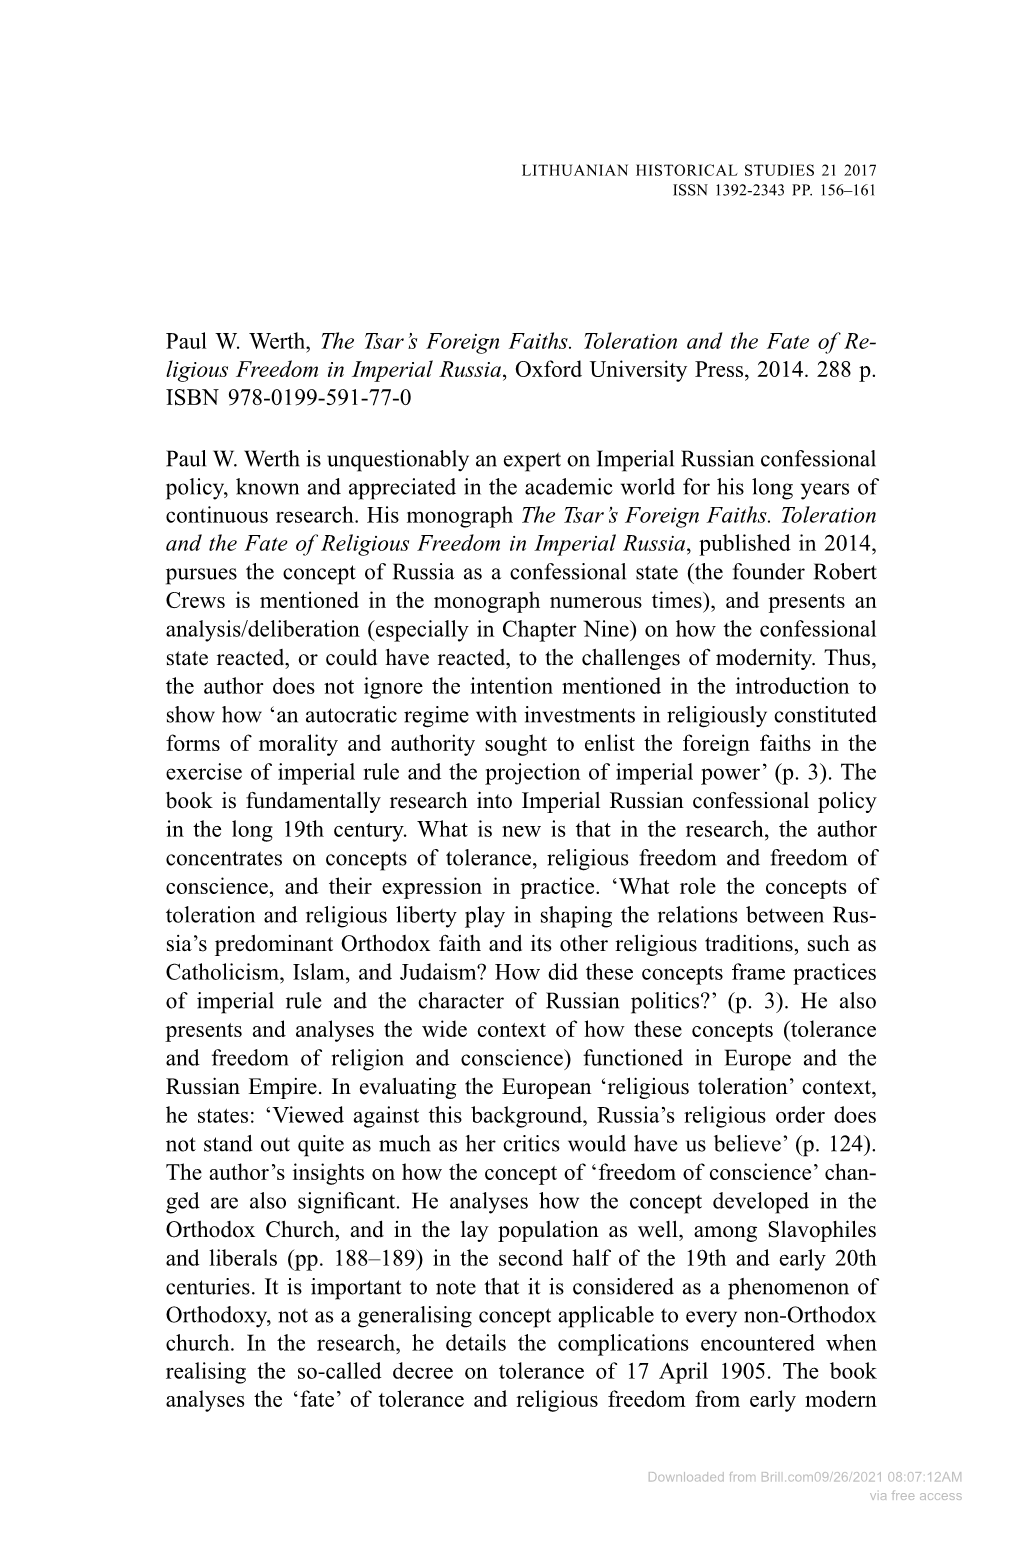 Paul W. Werth, the Tsar's Foreign Faiths. Toleration and the Fate of Re